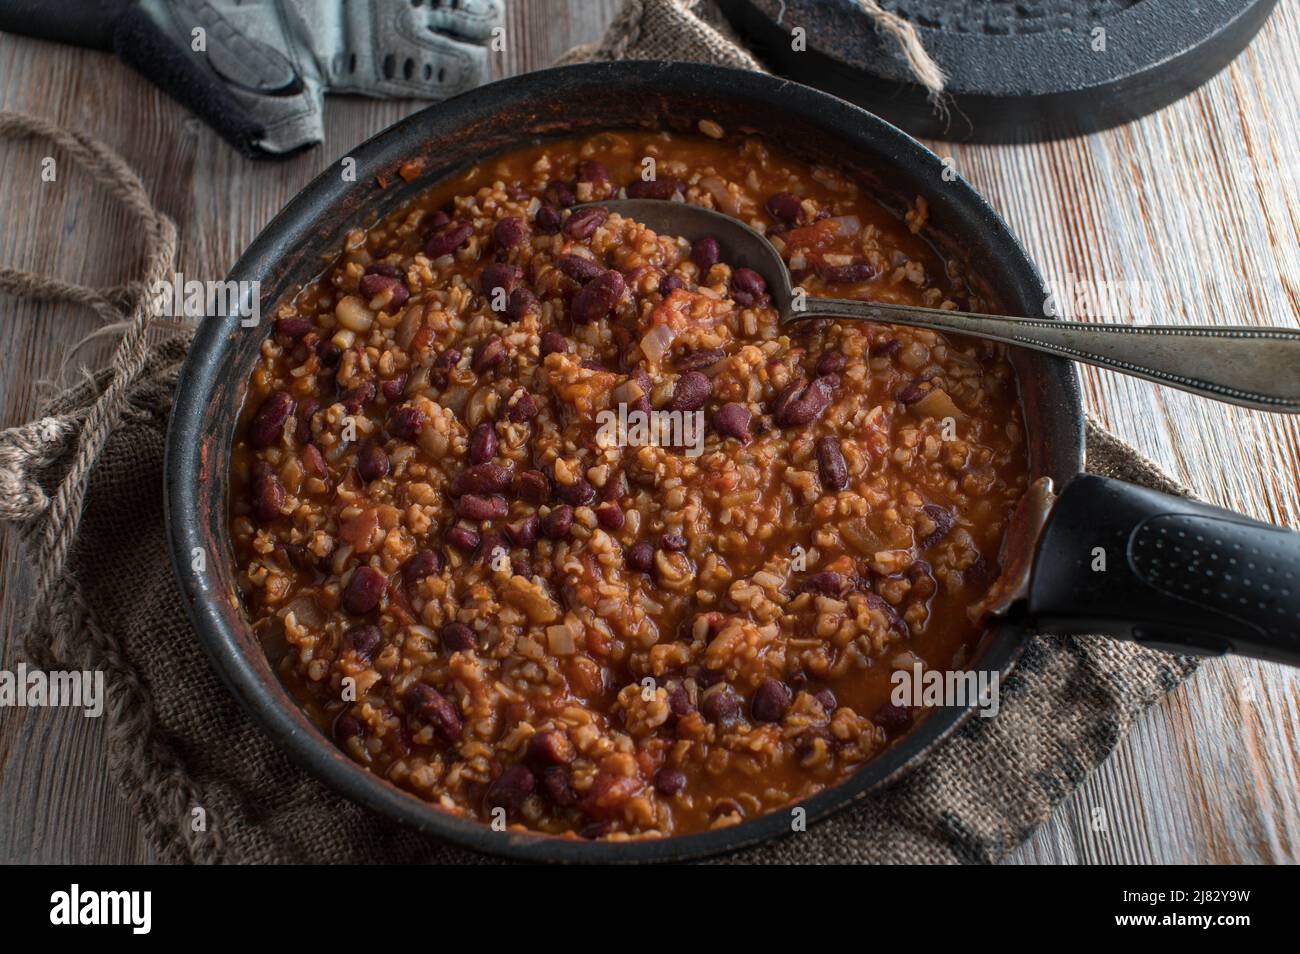 Fitness meal with brown rice, kidney beans, vegetable and tomato sauce. Served in a frying pan on wooden table Stock Photo